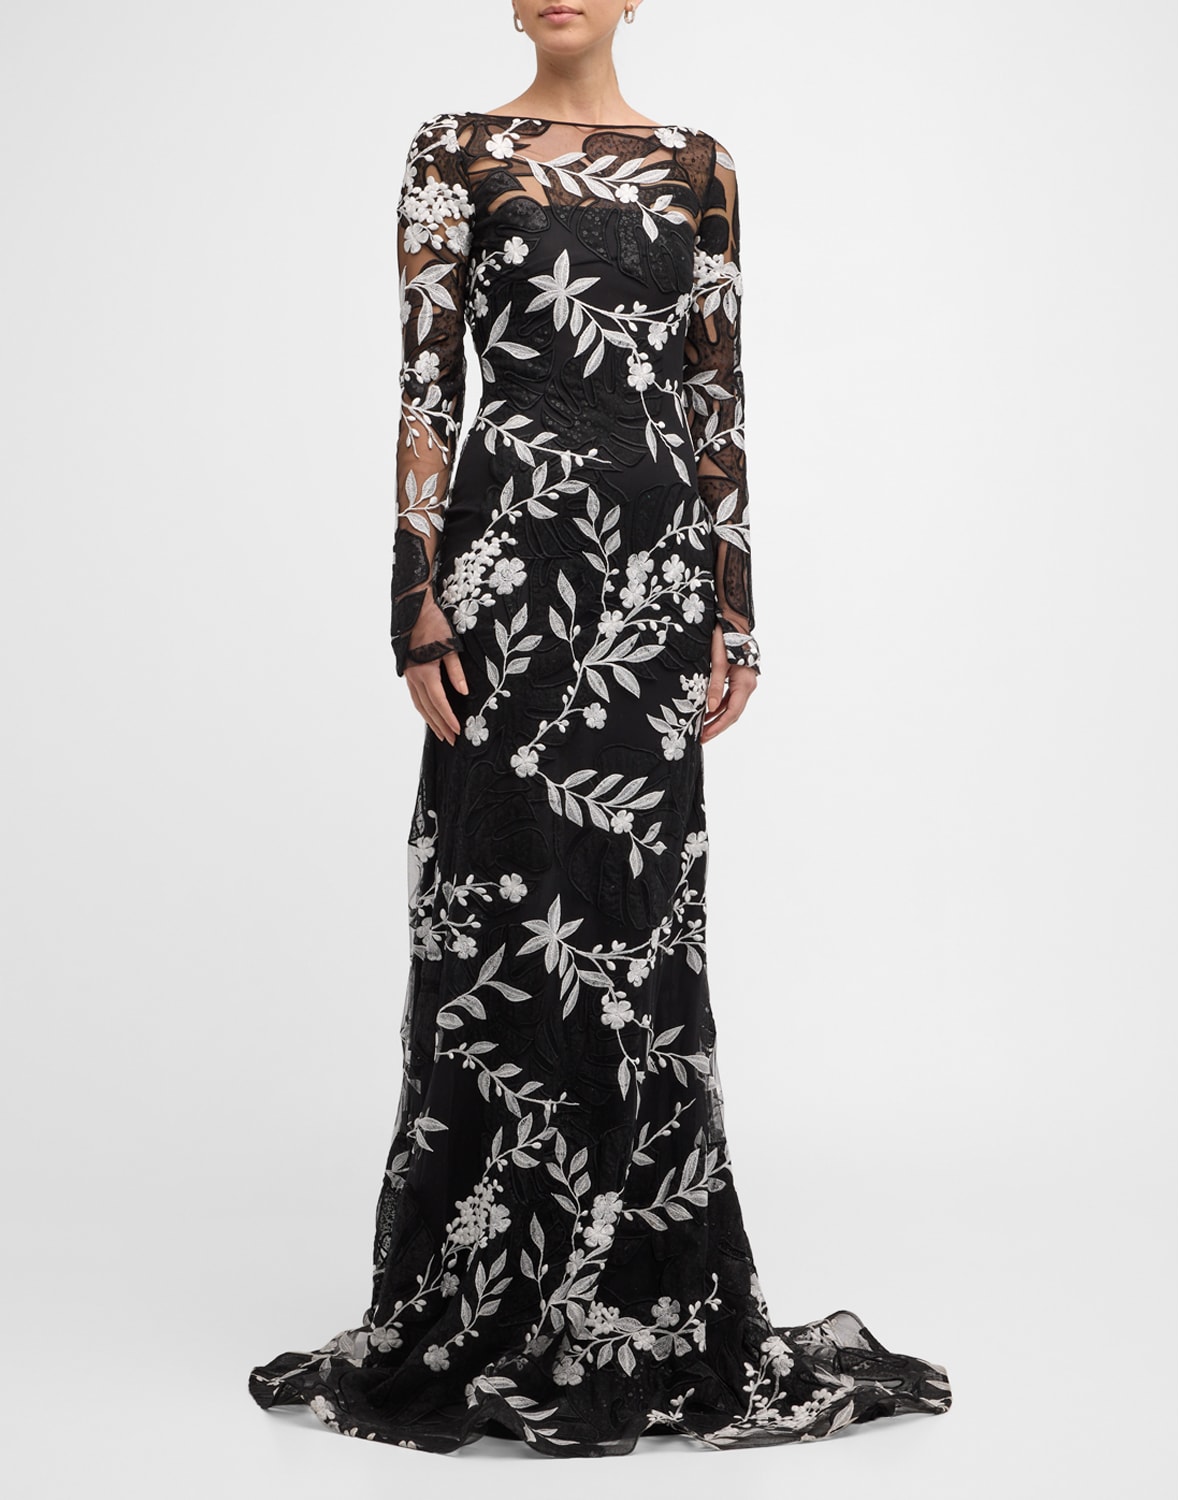 NAEEM KHAN FLORAL EMBROIDERED GOWN WITH SHEER OVERLAY